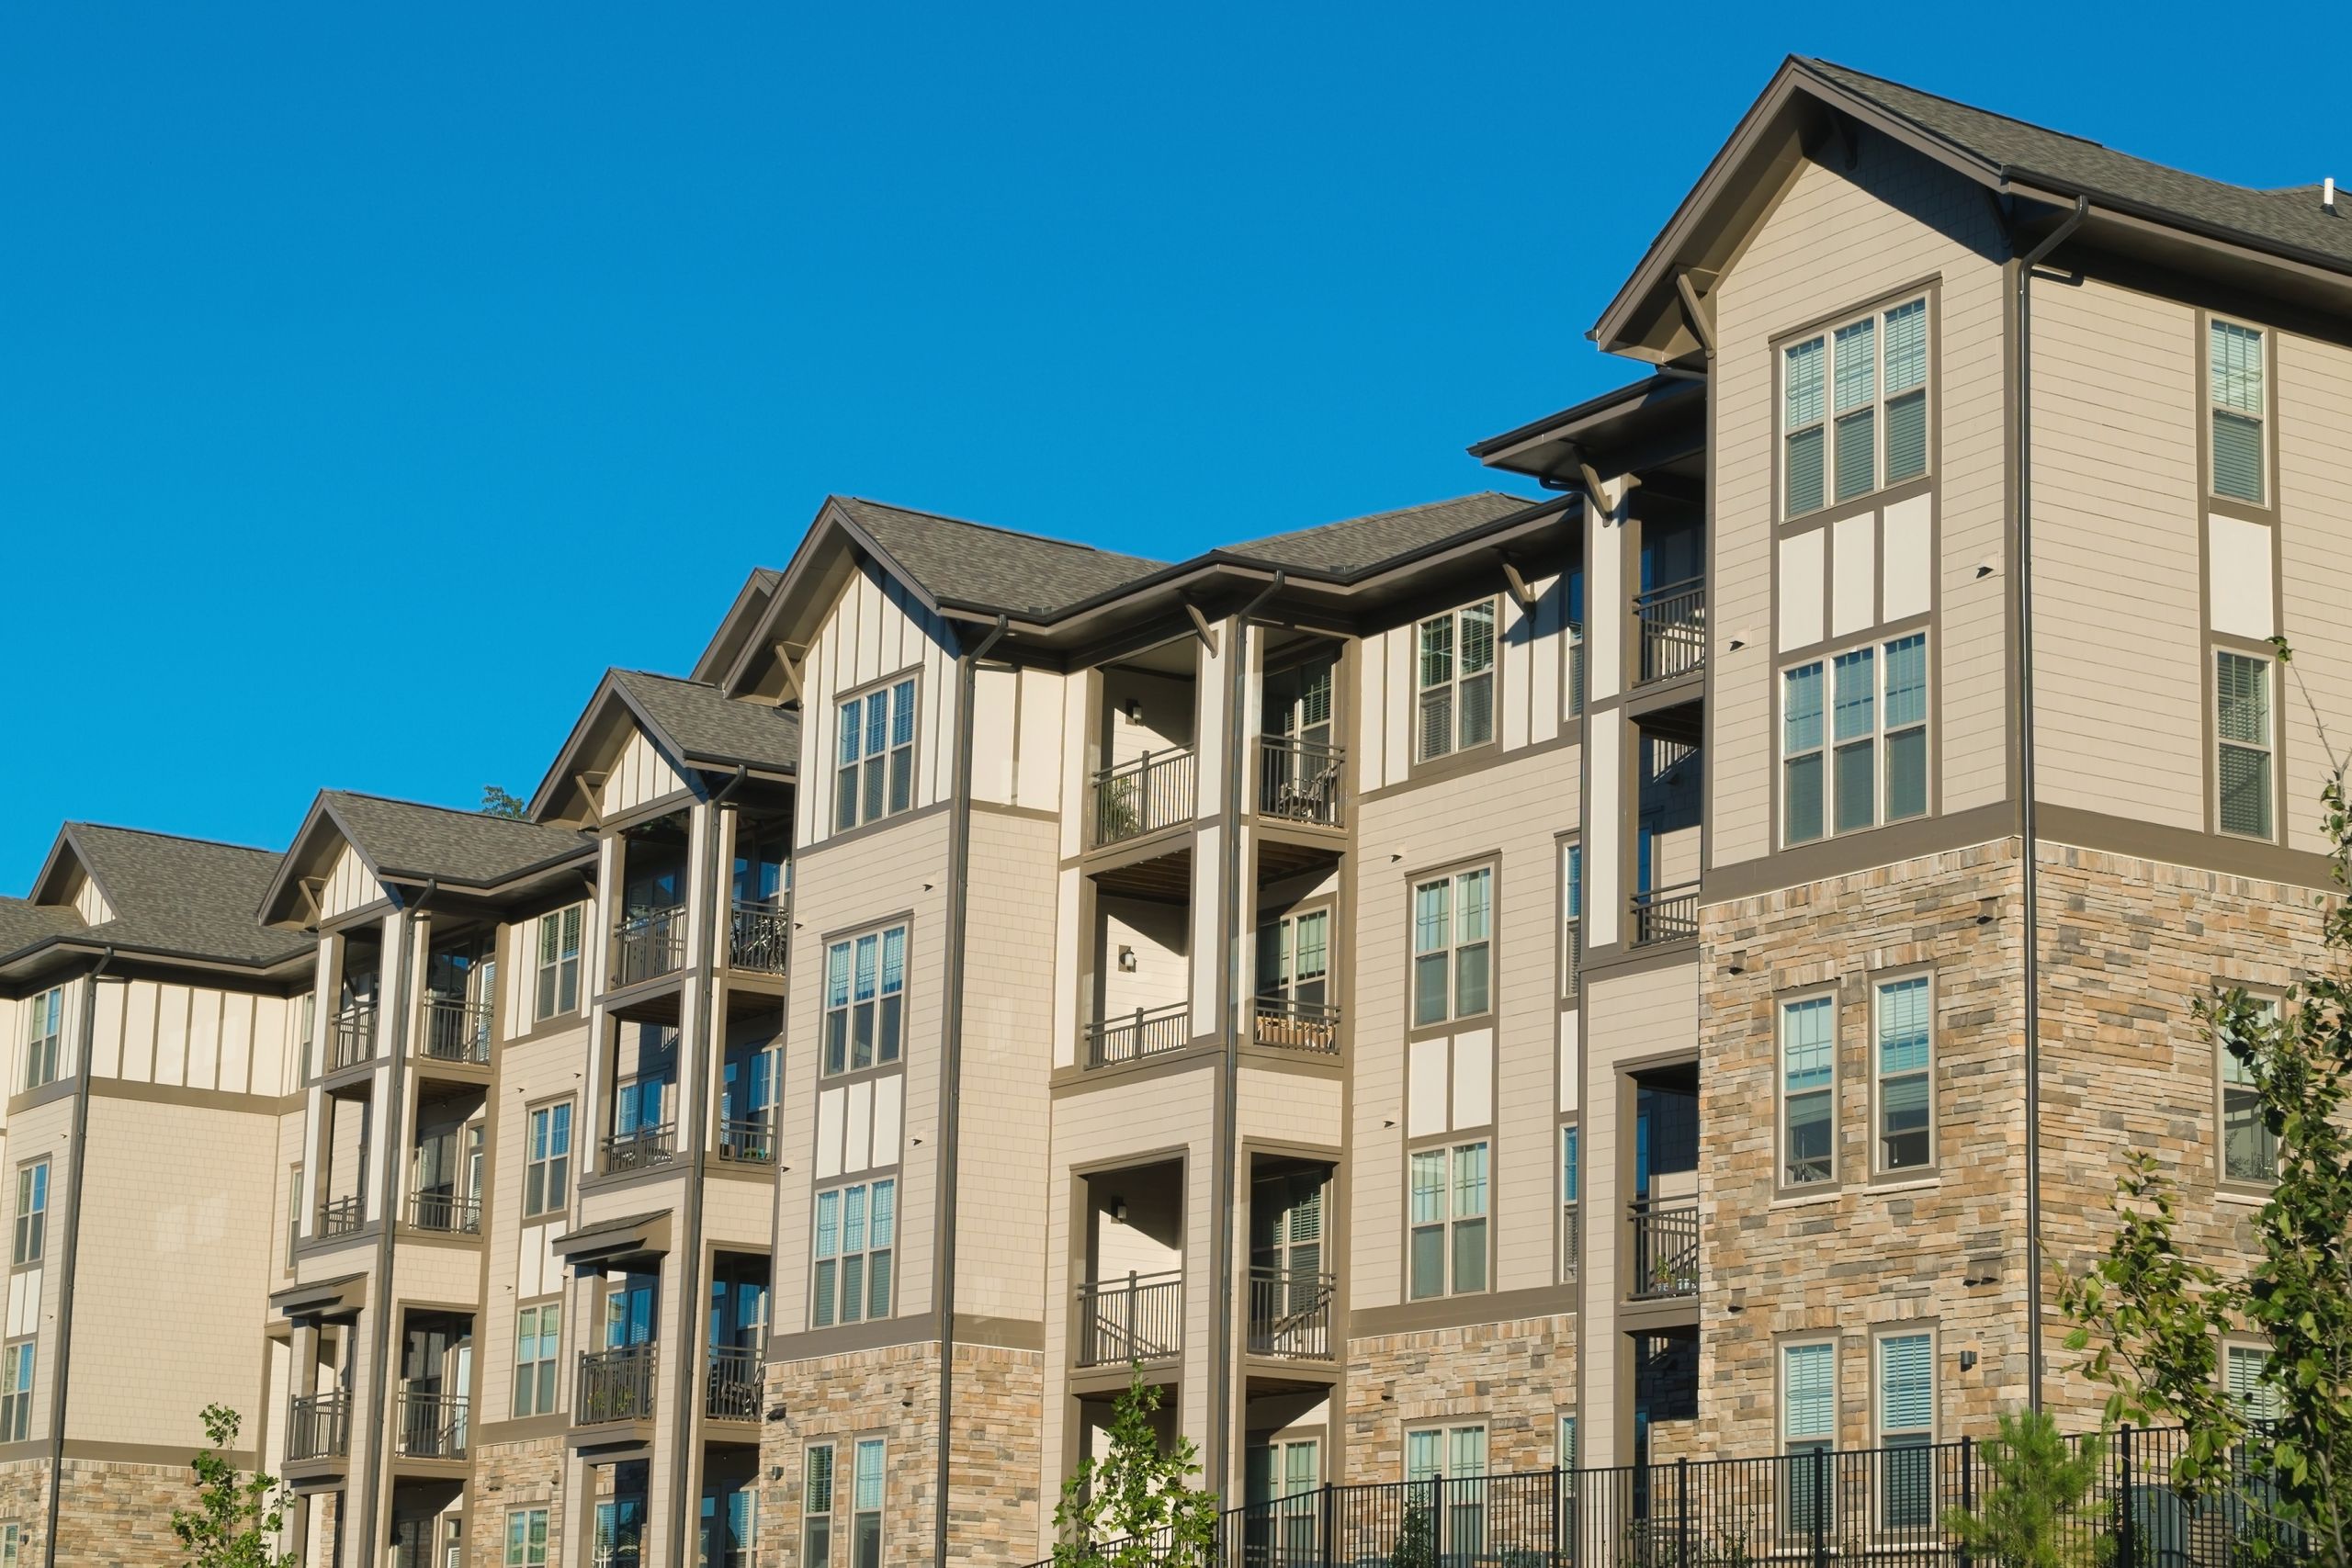 Townhouse Complex with tan colored commercial composite siding blue sky above